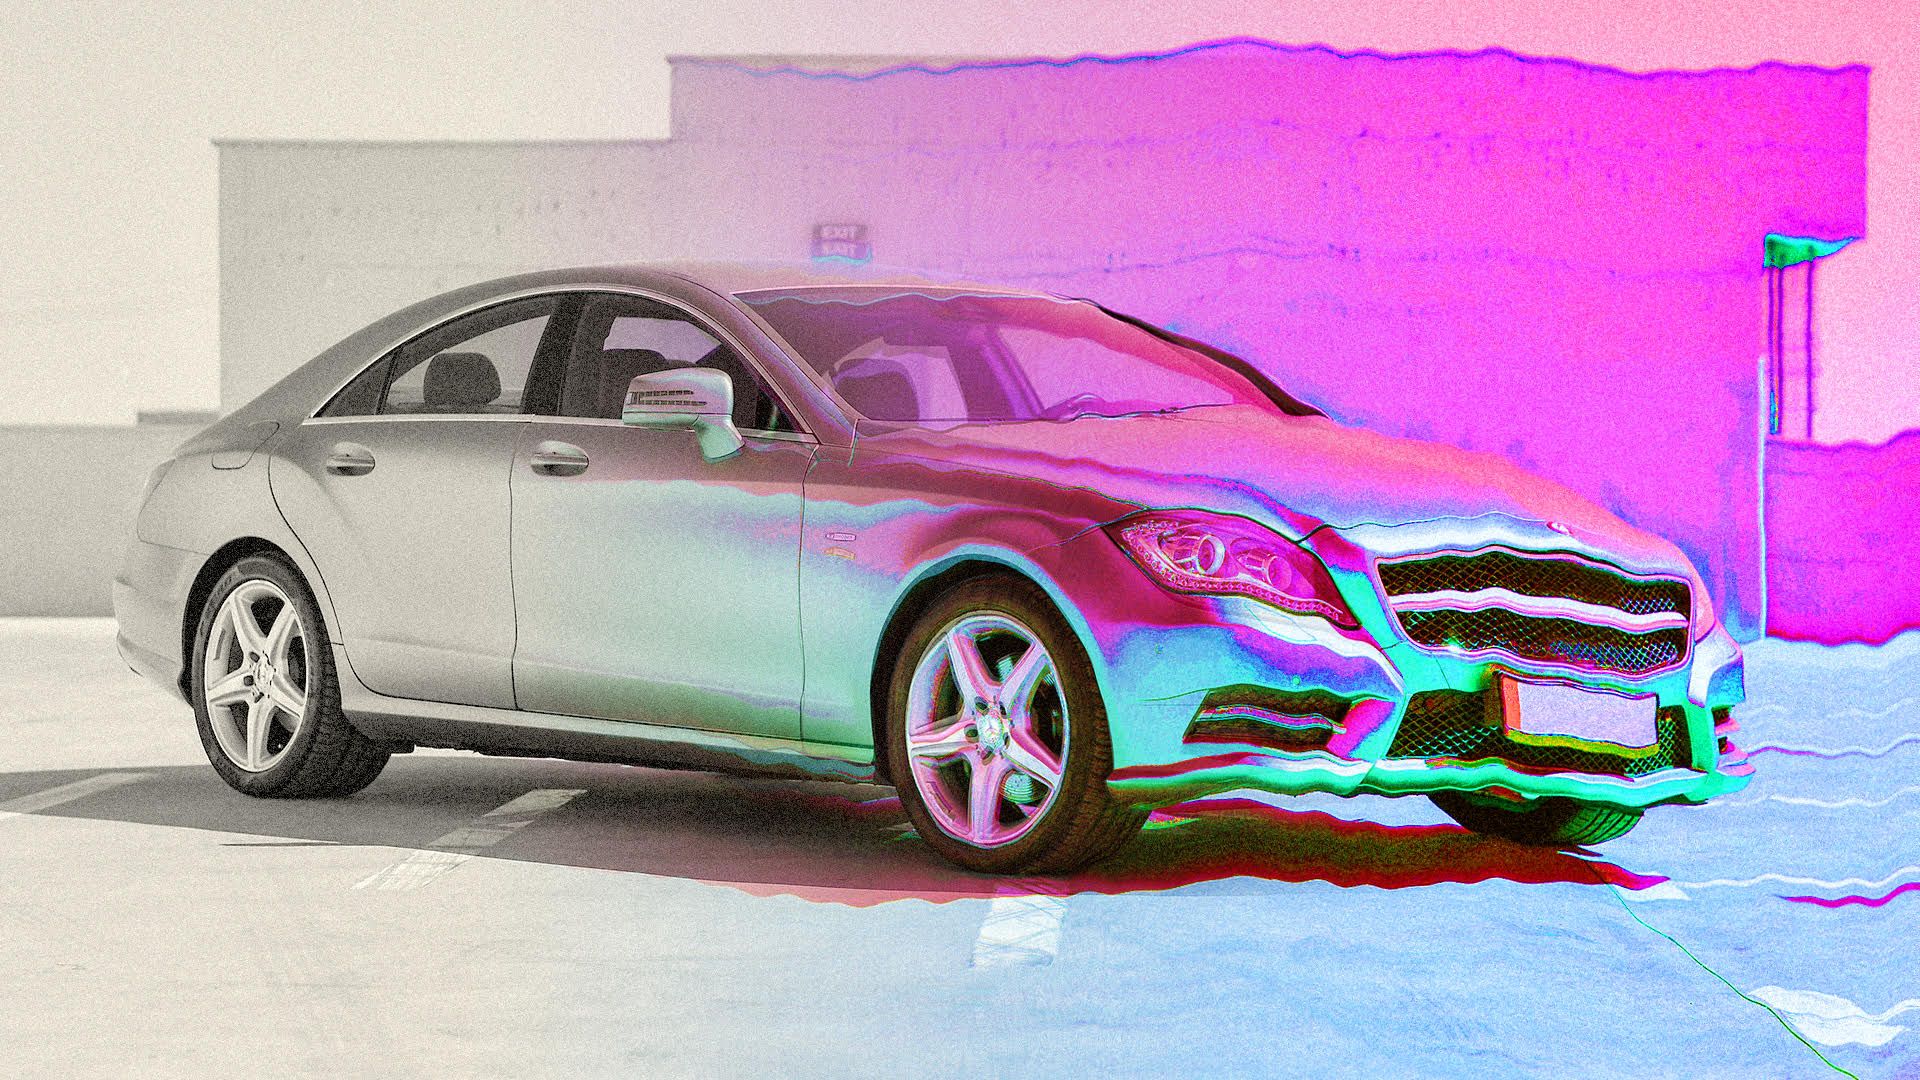 a stopped car, with colors morphing from "real world" to colorful virtual world